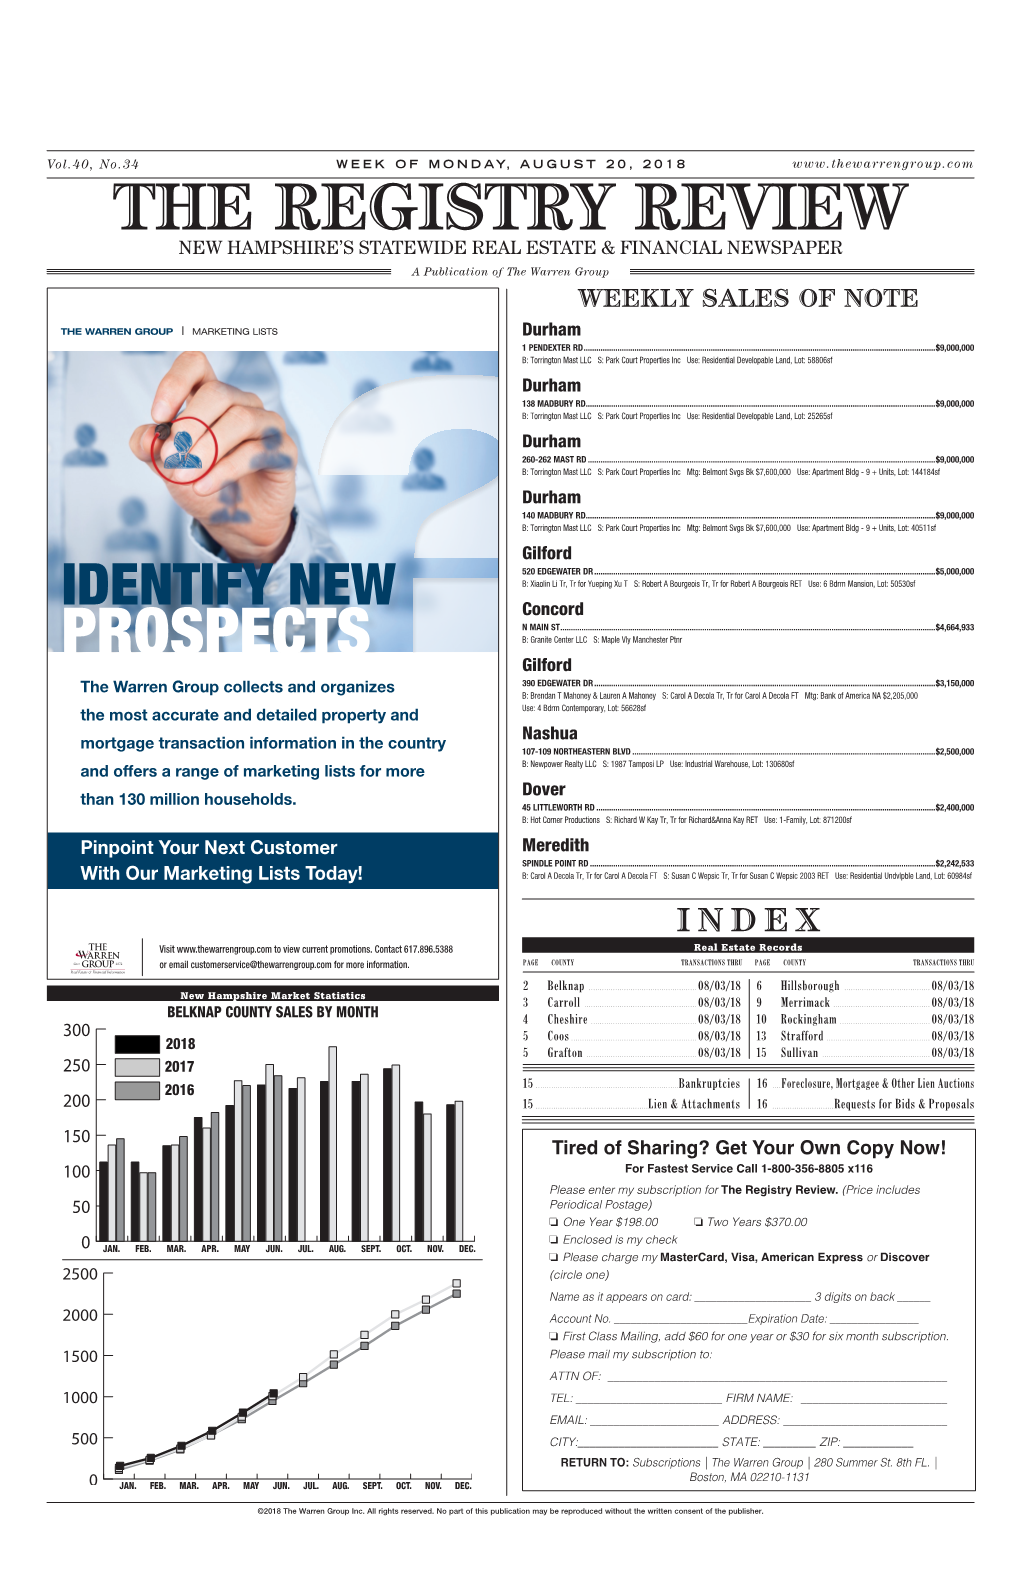 THE REGISTRY REVIEW NEW HAMPSHIRE’S STATEWIDE REAL ESTATE & FINANCIAL NEWSPAPER a Publication of the Warren Group WEEKLY SALES of NOTE